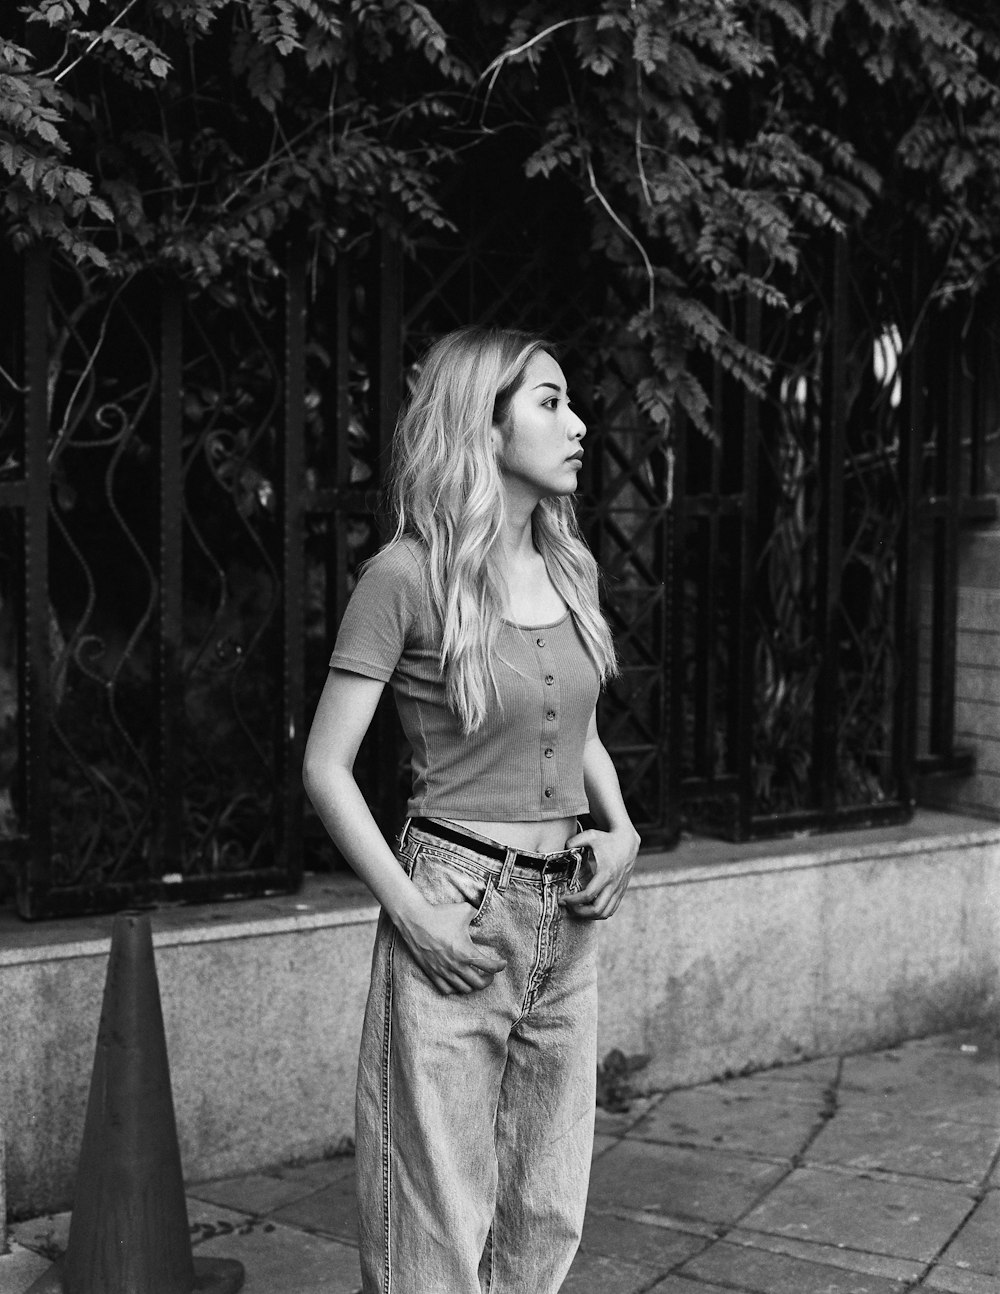 woman in tank top and denim jeans standing on concrete pavement in grayscale photography